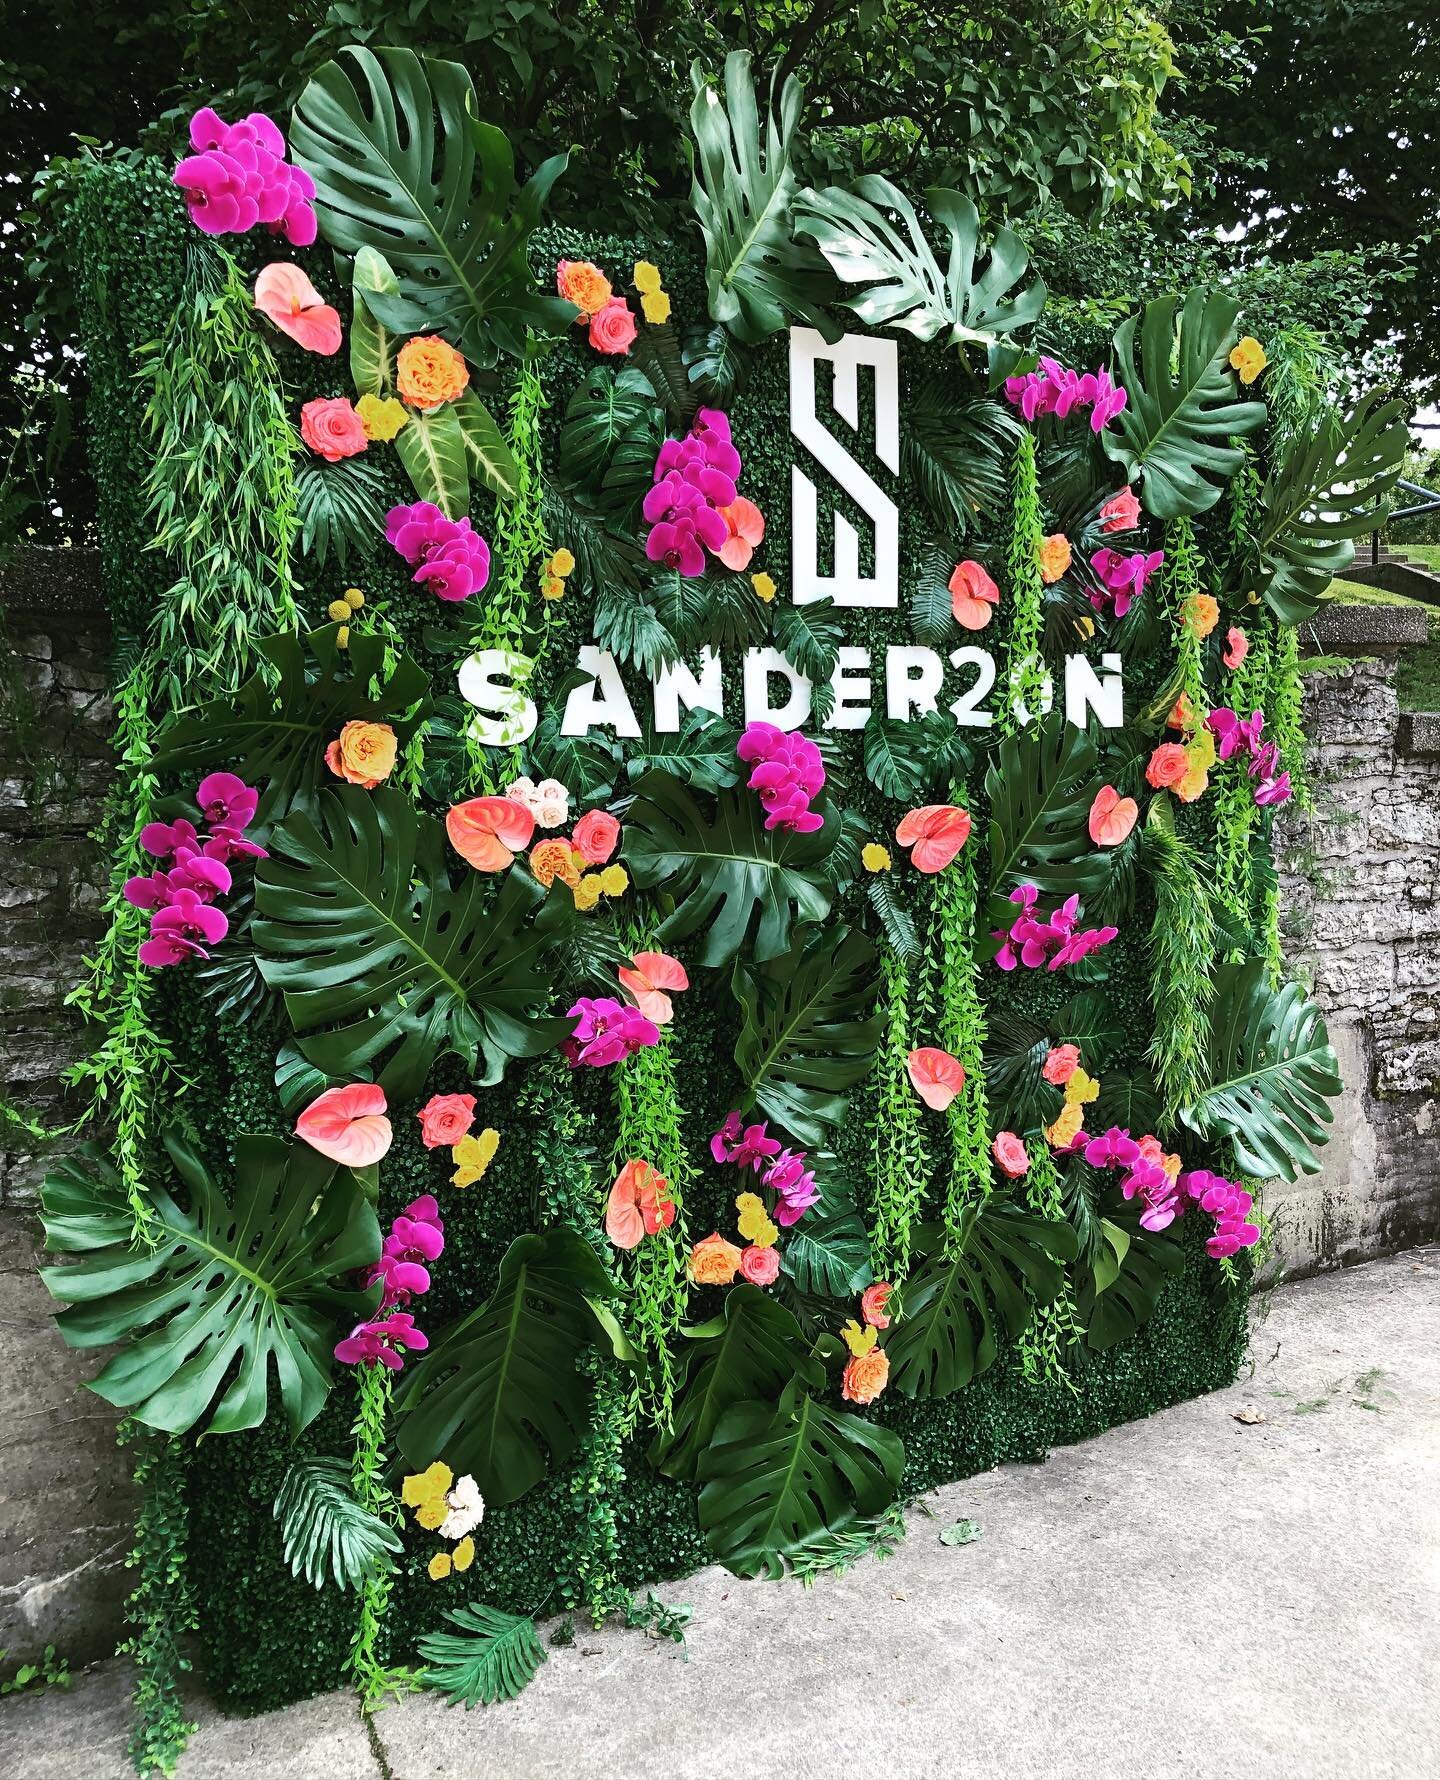 Celebrating Sanderson Wealth Management&rsquo;s 20th anniversary with a custom live wall! Boxwood and faux florals by us and @williams_florist added the perfect touch of gorgeous exotic florals shipped in from Miami! 🌿

Vision brought to life by @so